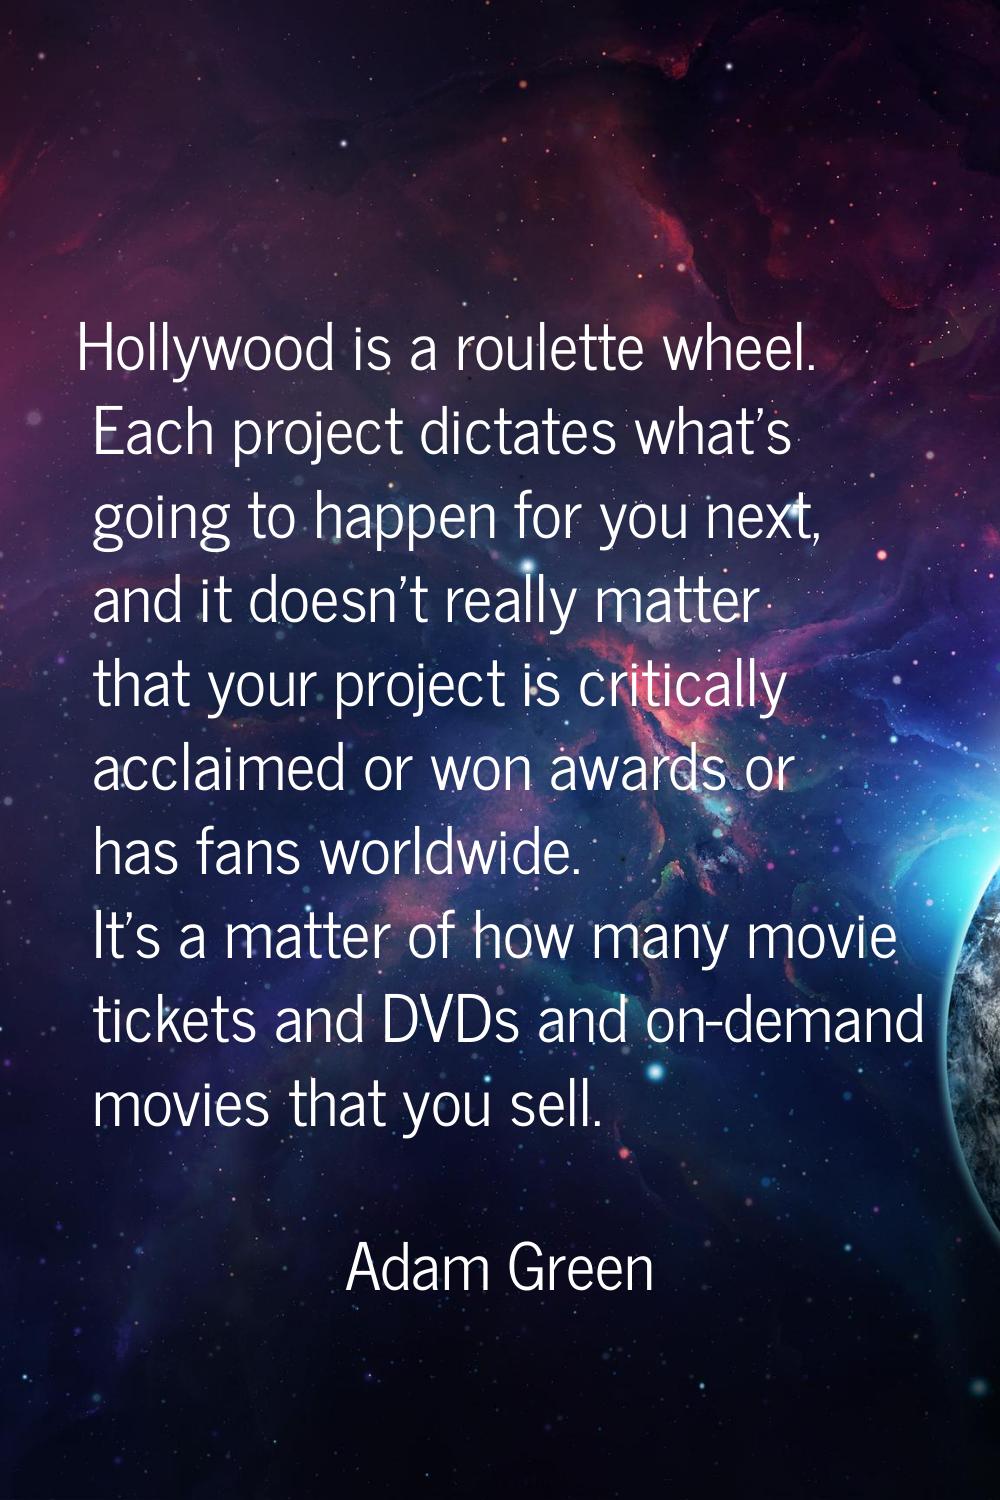 Hollywood is a roulette wheel. Each project dictates what's going to happen for you next, and it do